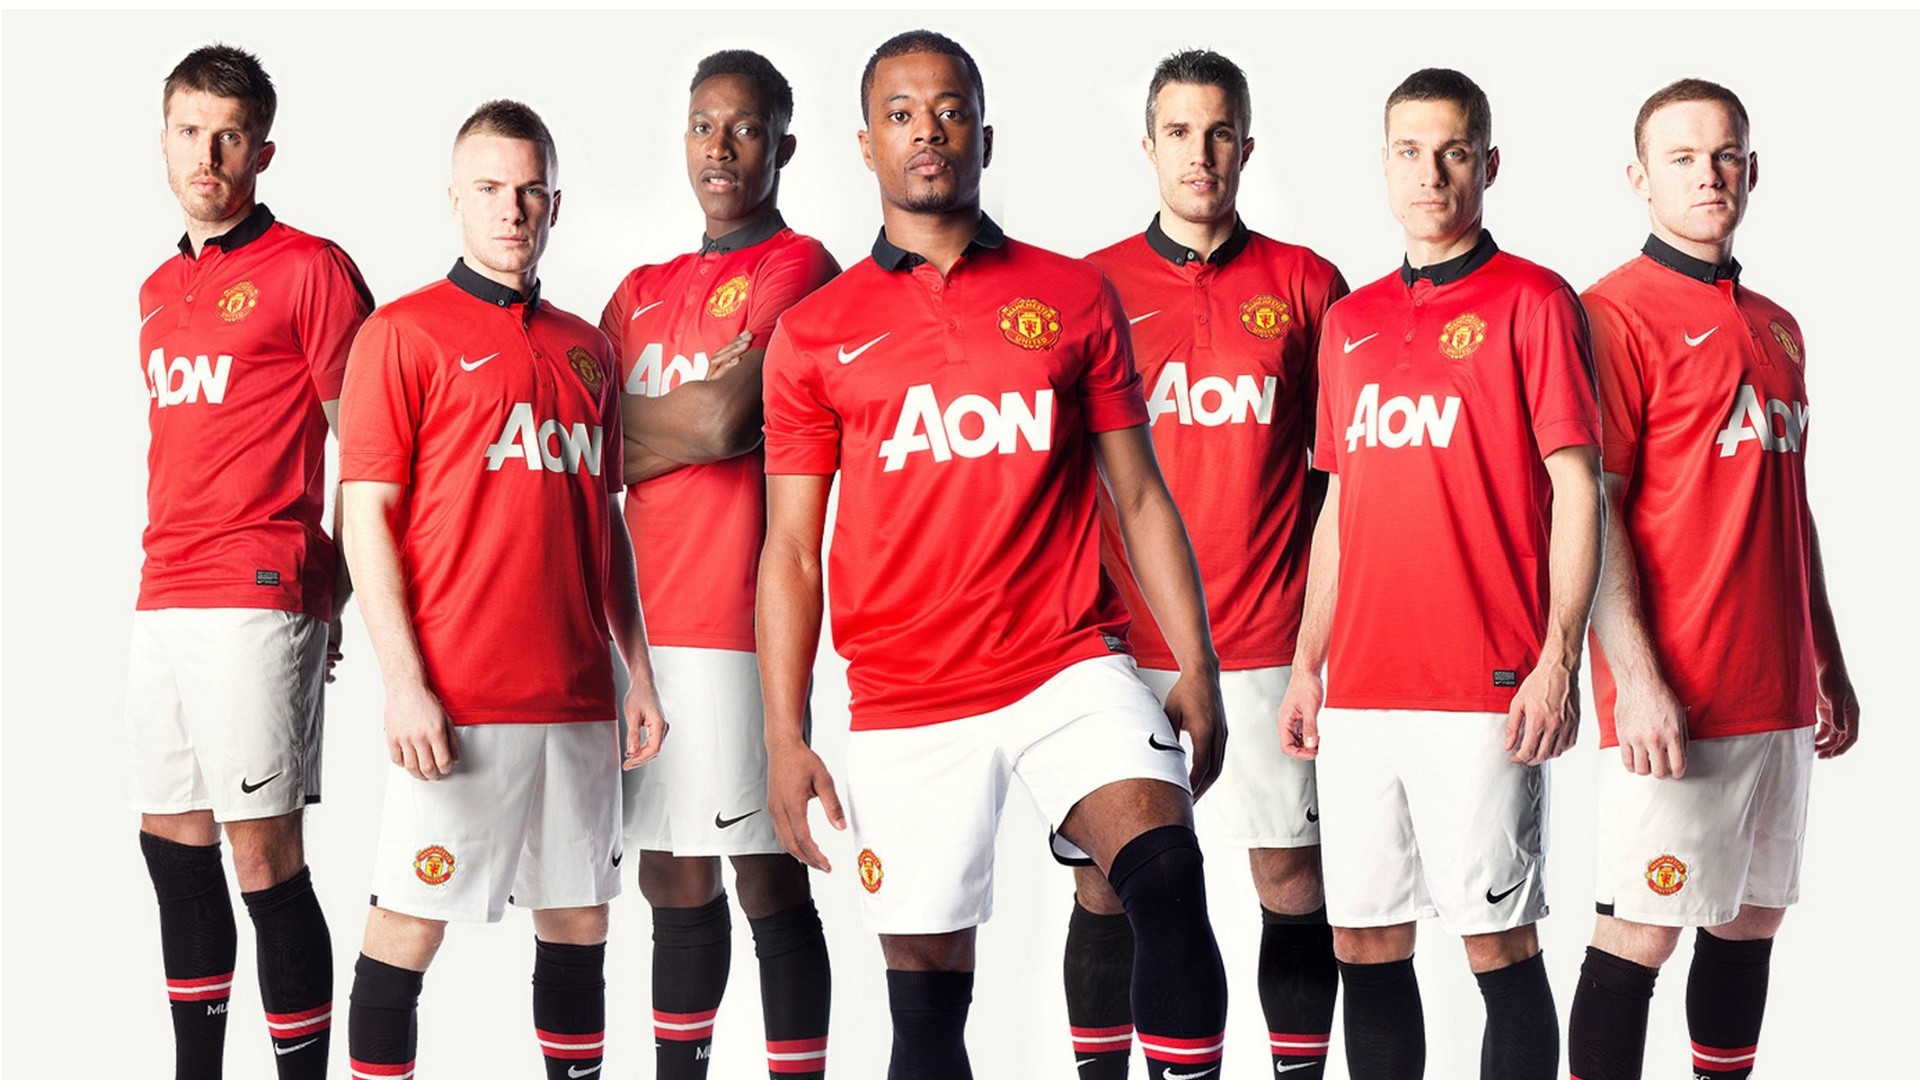 1920x1080 ... Download the 2013/14 Manchester United squad wallpaper - Official .